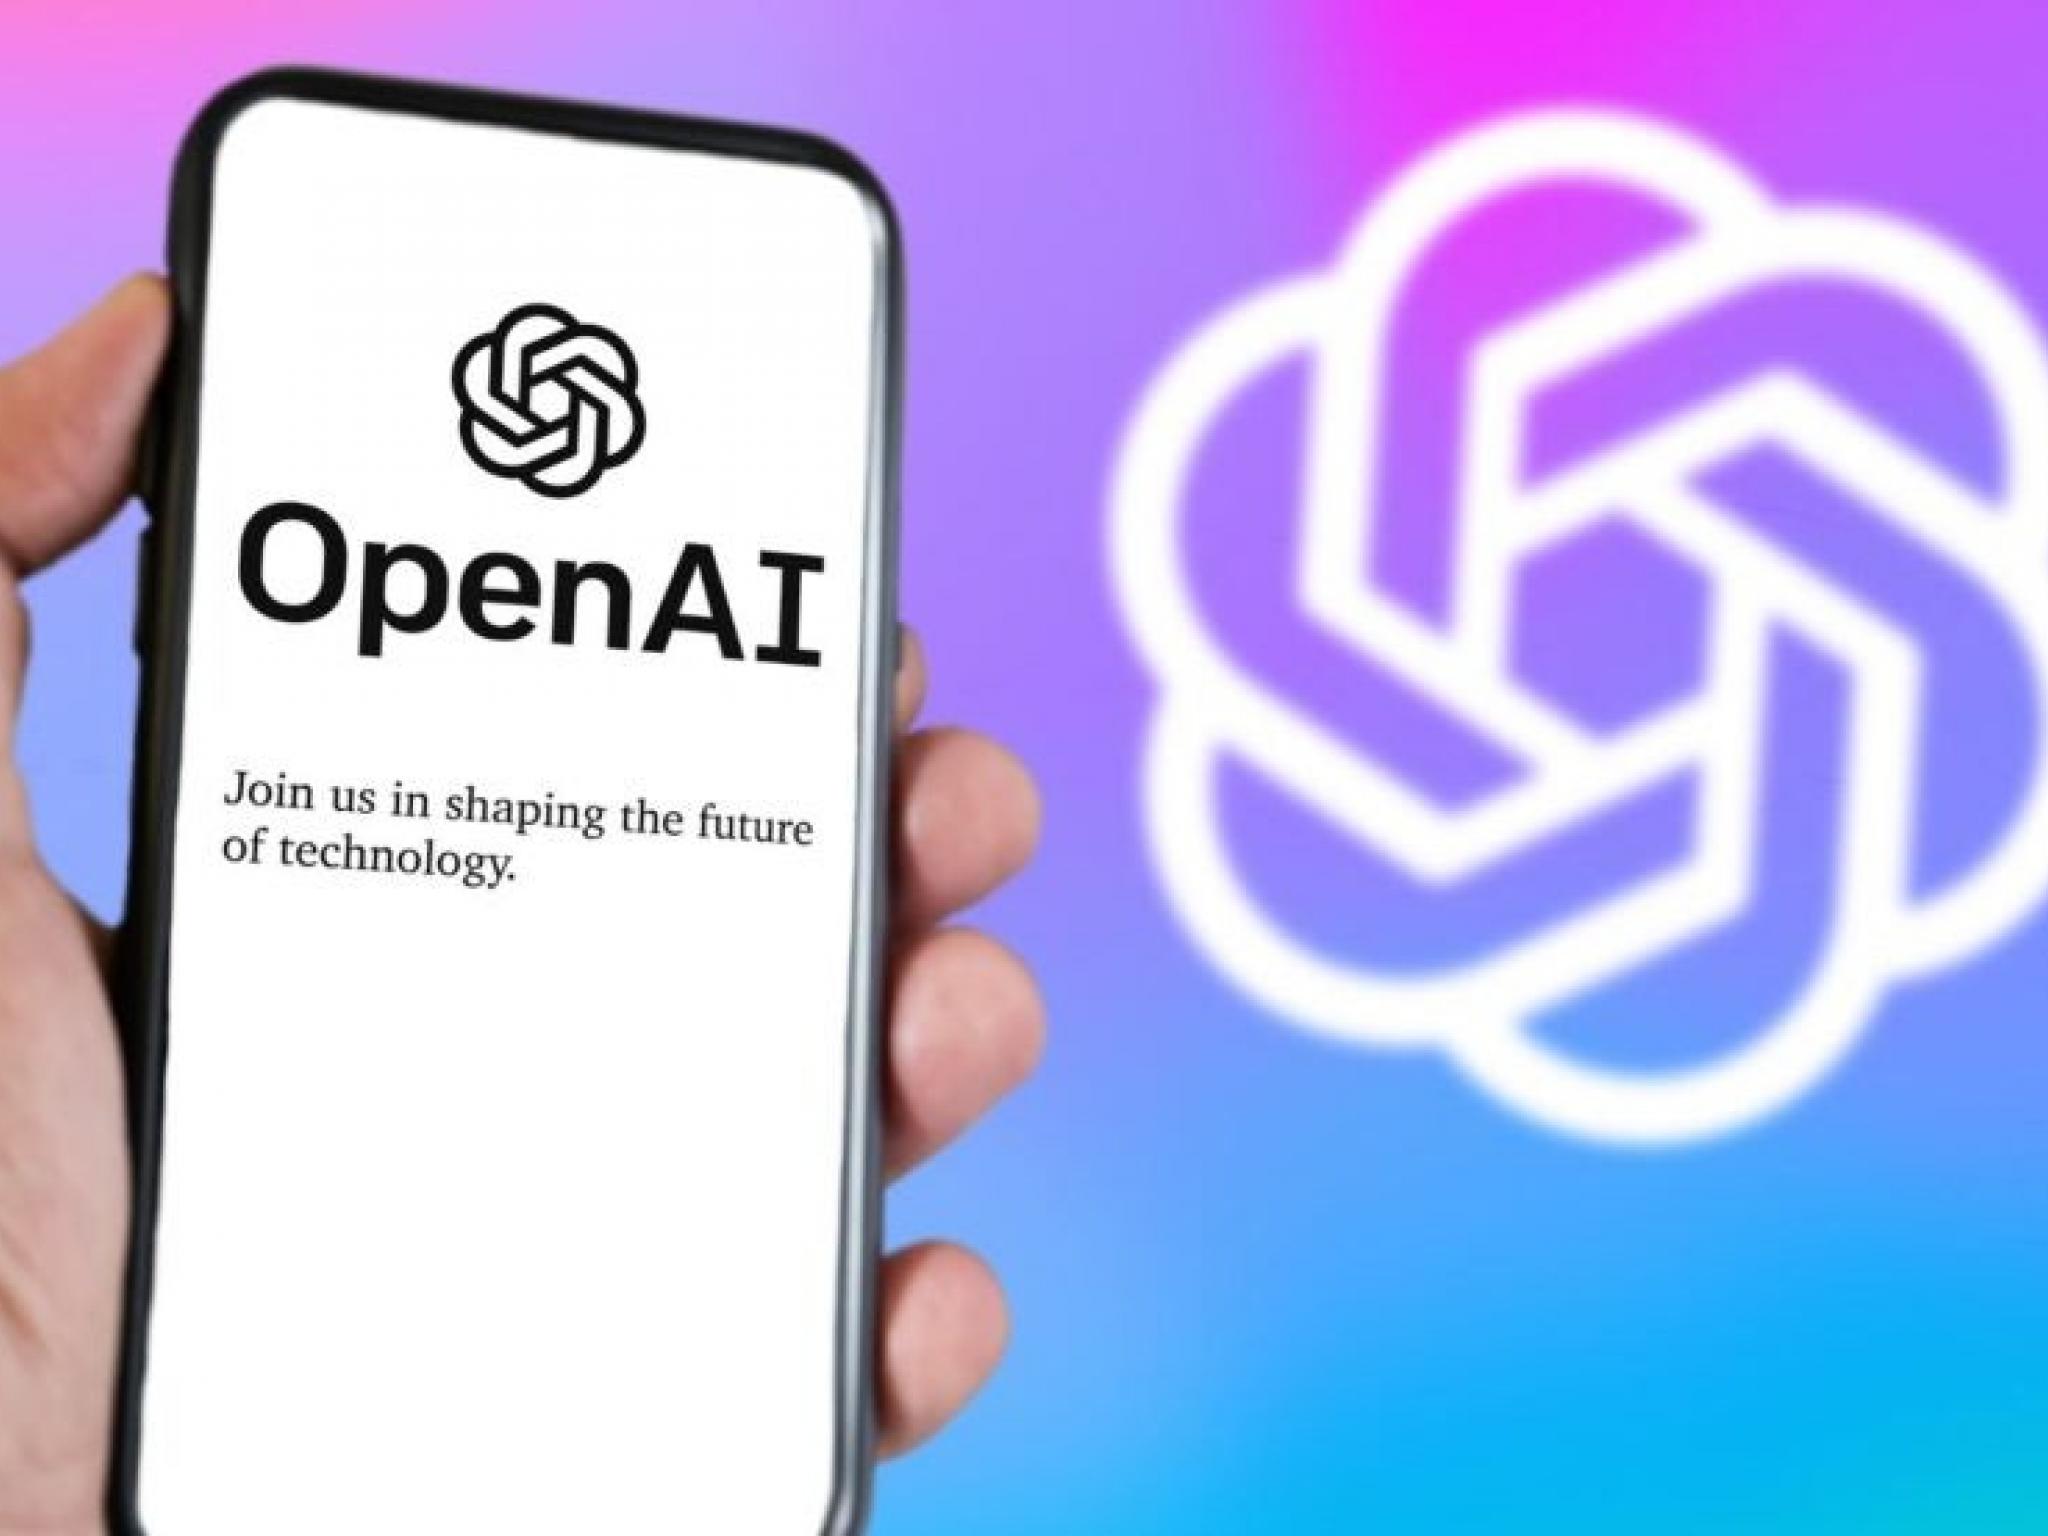  openai-appoints-cybersecurity-expert-and-retired-us-army-general-with-nsa-pedigree-to-board-enhancing-ai-safety-measures-post-lobbying-drive 